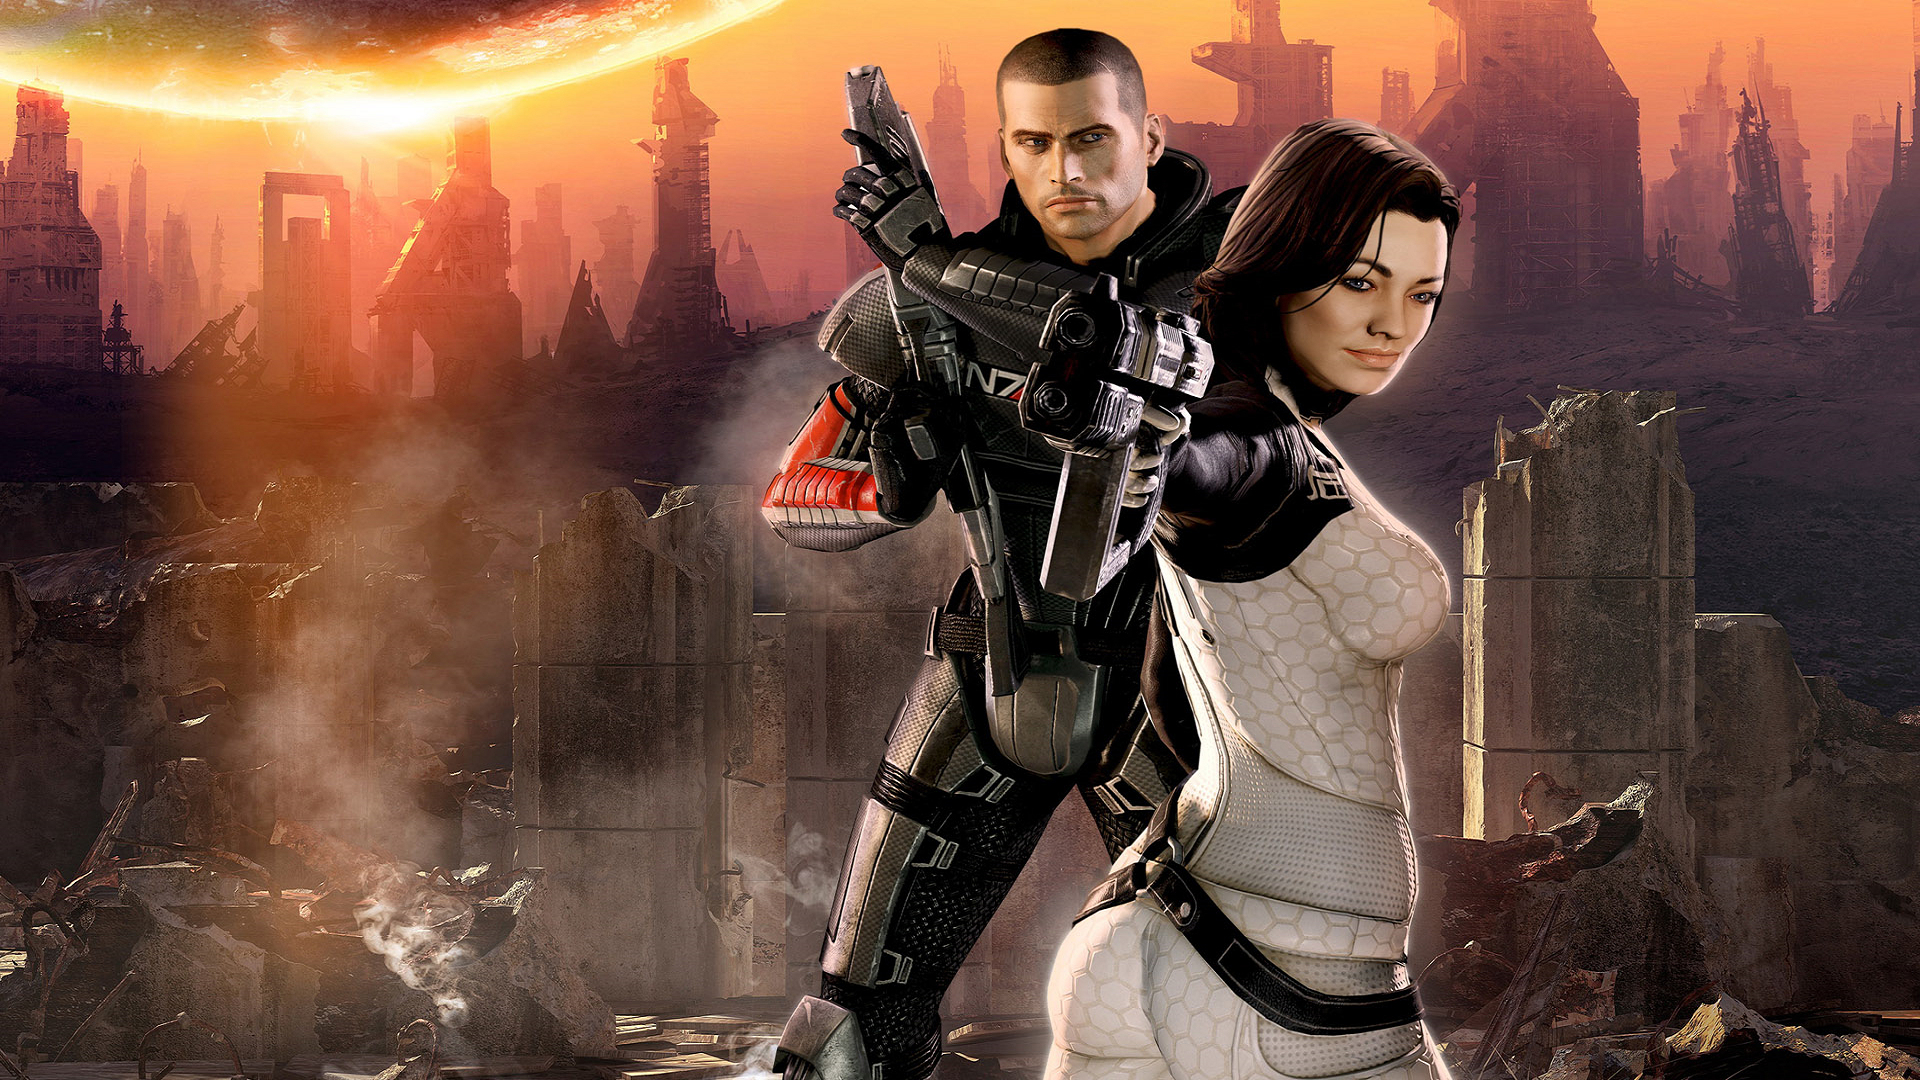 Mass Effect 2: Collector's Edition